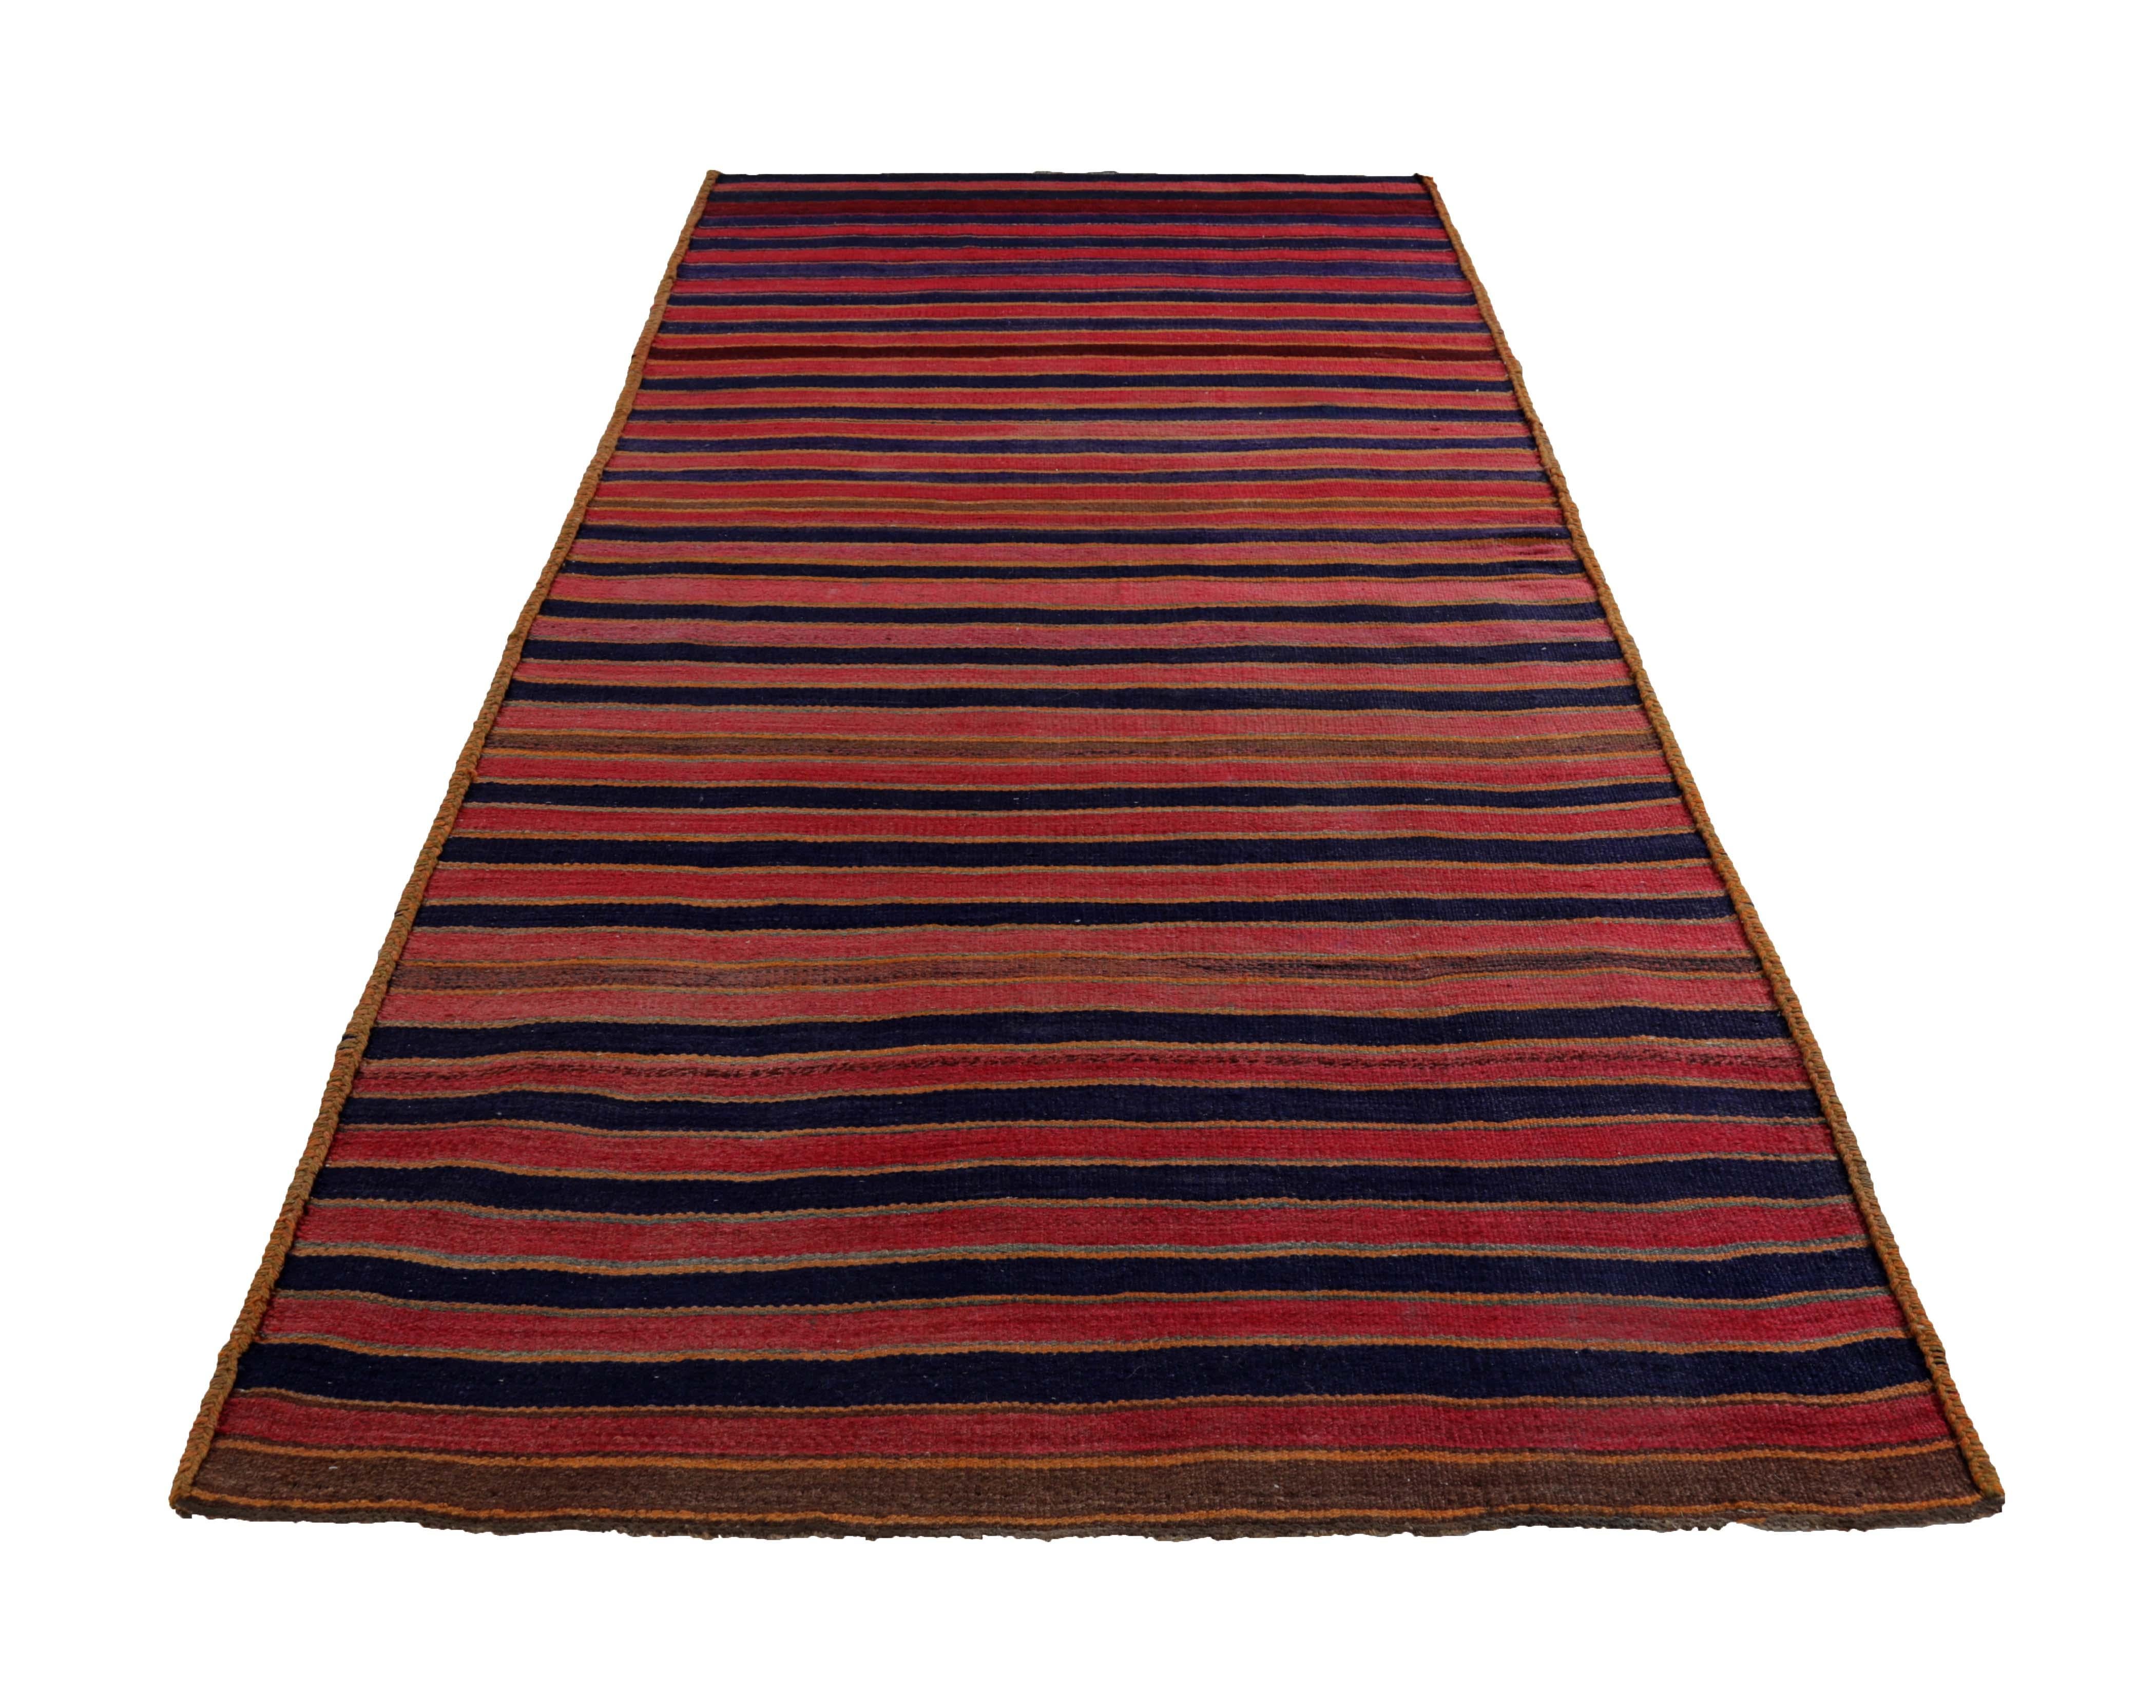 Turkish rug handwoven from the finest sheep’s wool and colored with all-natural vegetable dyes that are safe for humans and pets. It’s a traditional Kilim flat-weave design featuring red and blue stripes on a brown field. It’s a stunning piece to